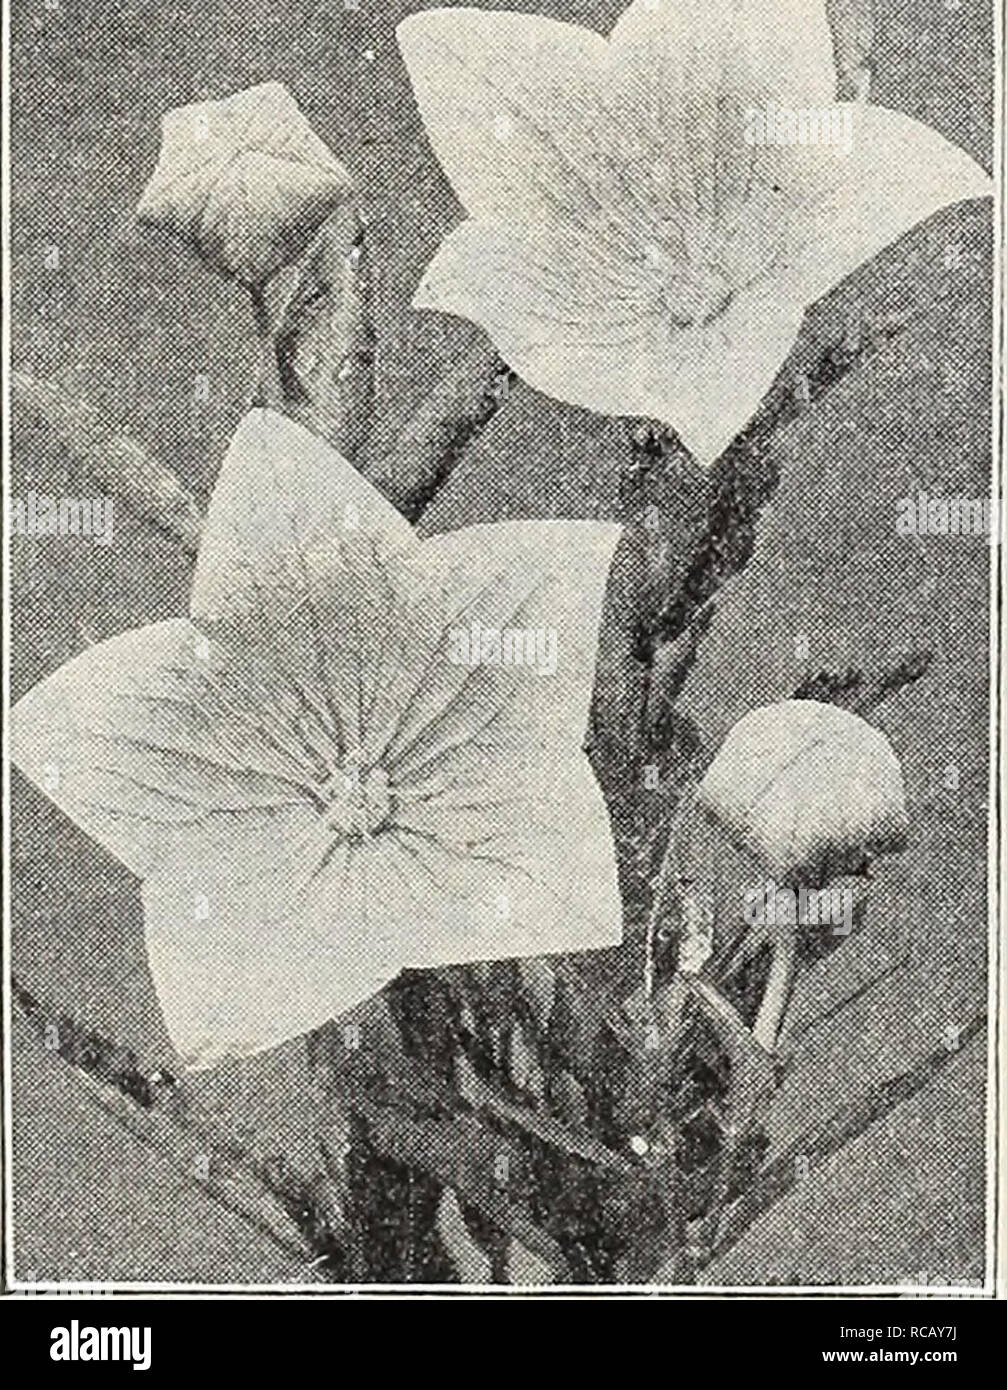 . Dreer's garden book : 1906. Seeds Catalogs; Nursery stock Catalogs; Gardening Equipment and supplies Catalogs; Flowers Seeds Catalogs; Vegetables Seeds Catalogs; Fruit Seeds Catalogs. y UMADRffR-PHILAKLPhlA Mm HARDY PEREdrilAL PbANTV llffl i^s PHYSOSTEGIA (FaUe Dragon Head). One of the most beautiful of our midsummer-flowering perennials, forming dense bushes 3 to 4 feet higli, bearing spiices of delicate tubular flowers not unlike a gigantic heather. (See cut.) Virglnica. Bright but soft pink. — Alba. Pure wliite; very hne. — Speciosa. Very delicate pin!;. 15 cts. each ; §1 50 per doz.; $10 Stock Photo